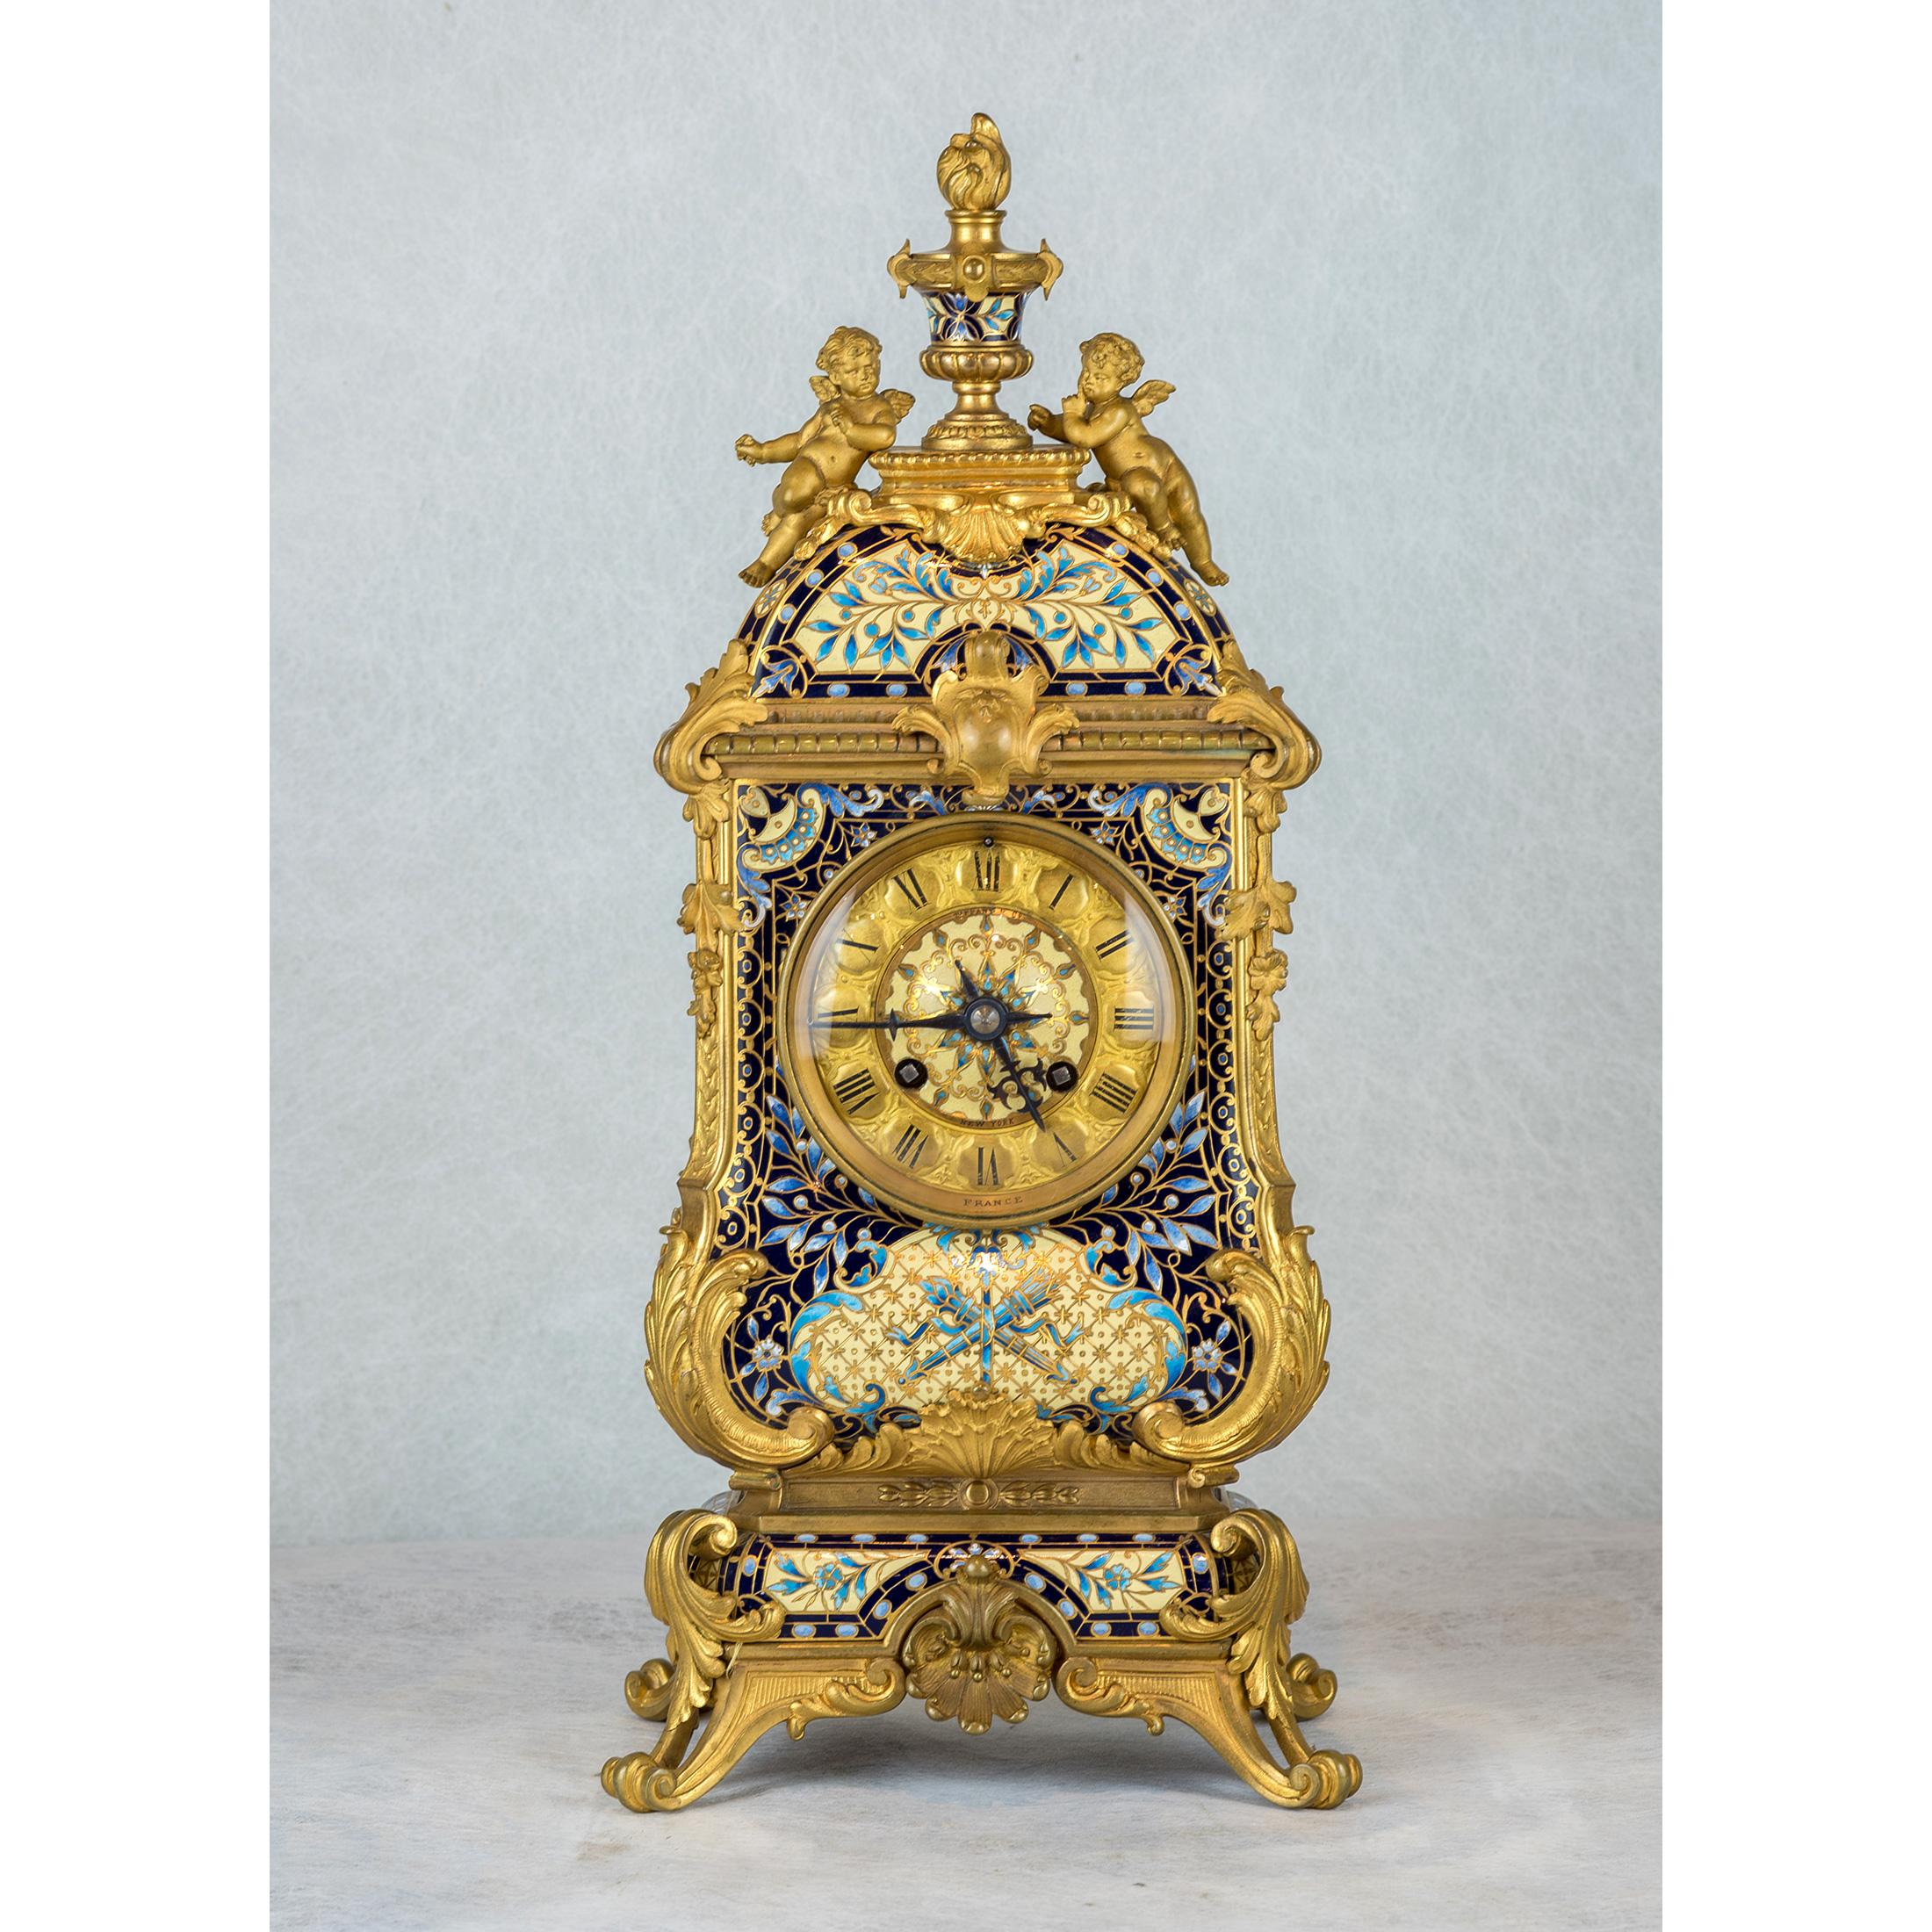 Exceptional quality bronze mounted champlevé enamel three-piece clock garniture in the Moorish style, retailed by Tiffany & Co., NY.
Comprising a clock marked 'Tiffany & Co.' on face and on back of movement, and a pair of five-light candelabra.